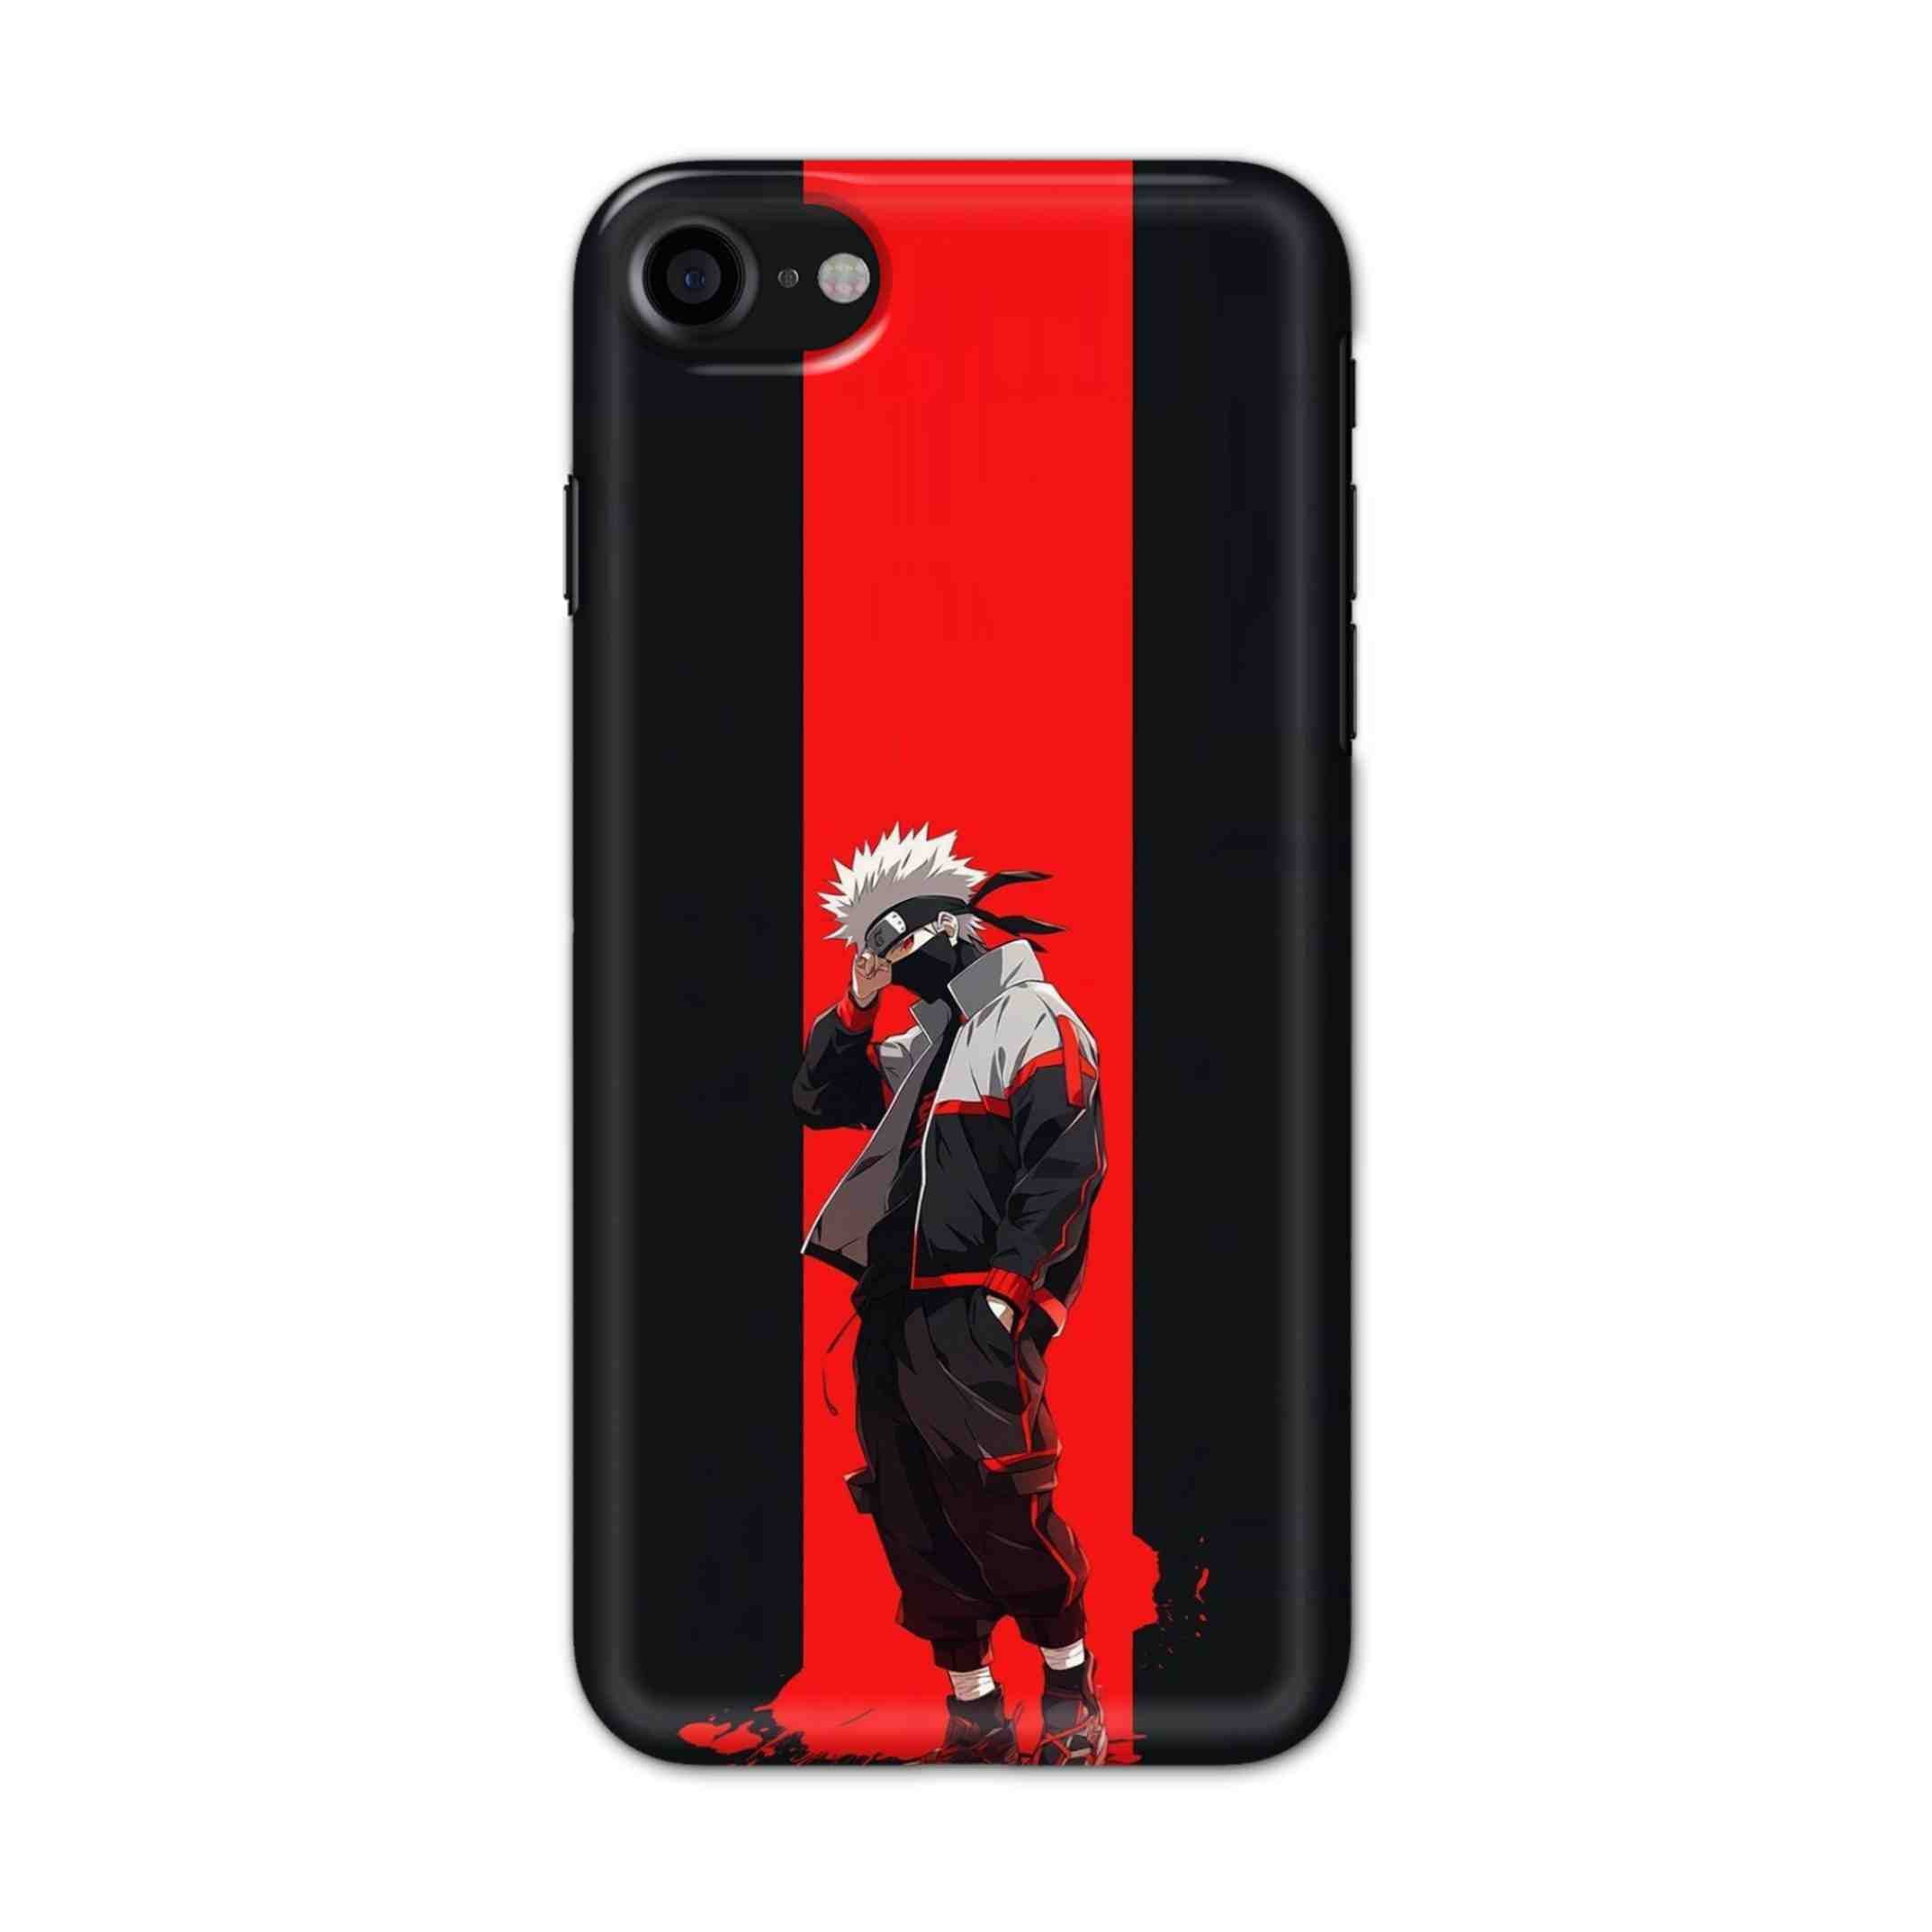 Buy Steins Hard Back Mobile Phone Case/Cover For iPhone 7 / 8 Online